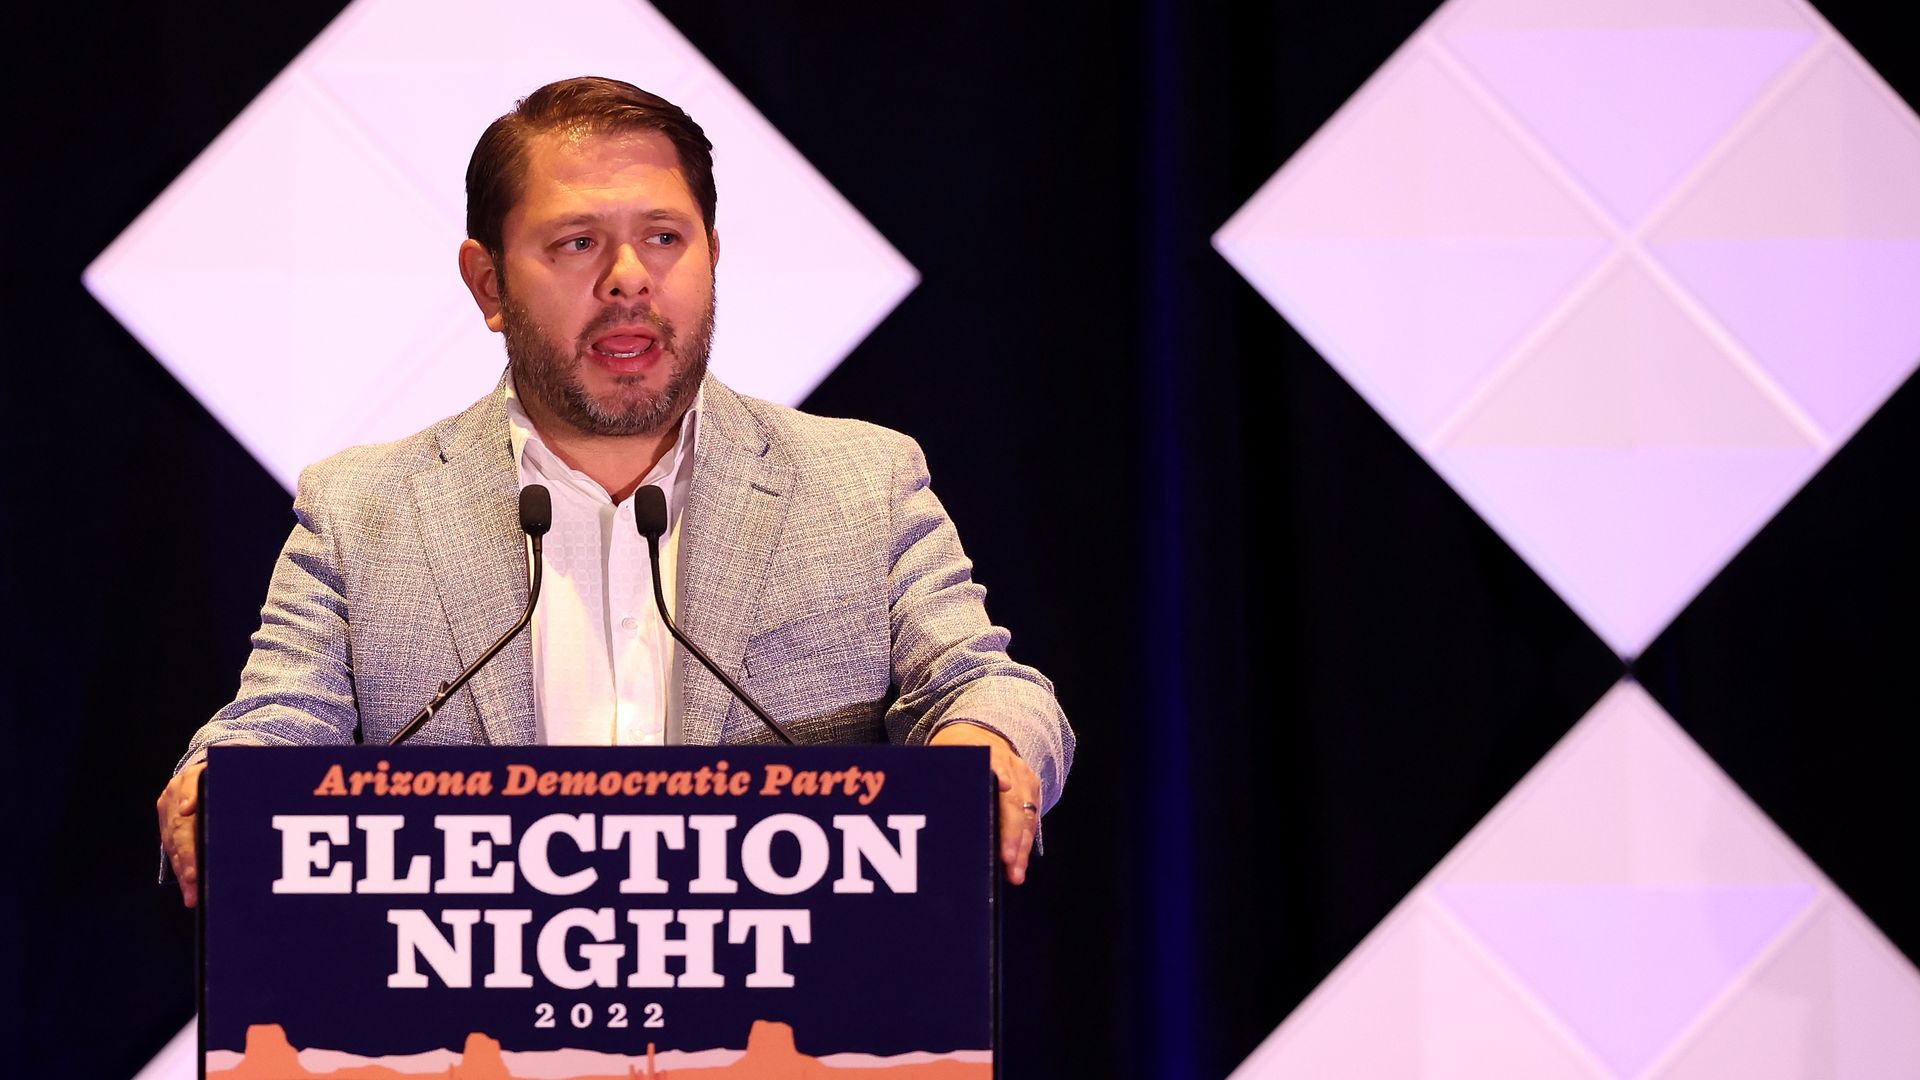 Democratic Rep. Ruben Gallego (D-AZ) speaks to supporters at an election night watch party at the Renaissance Phoenix Downtown Hotel.